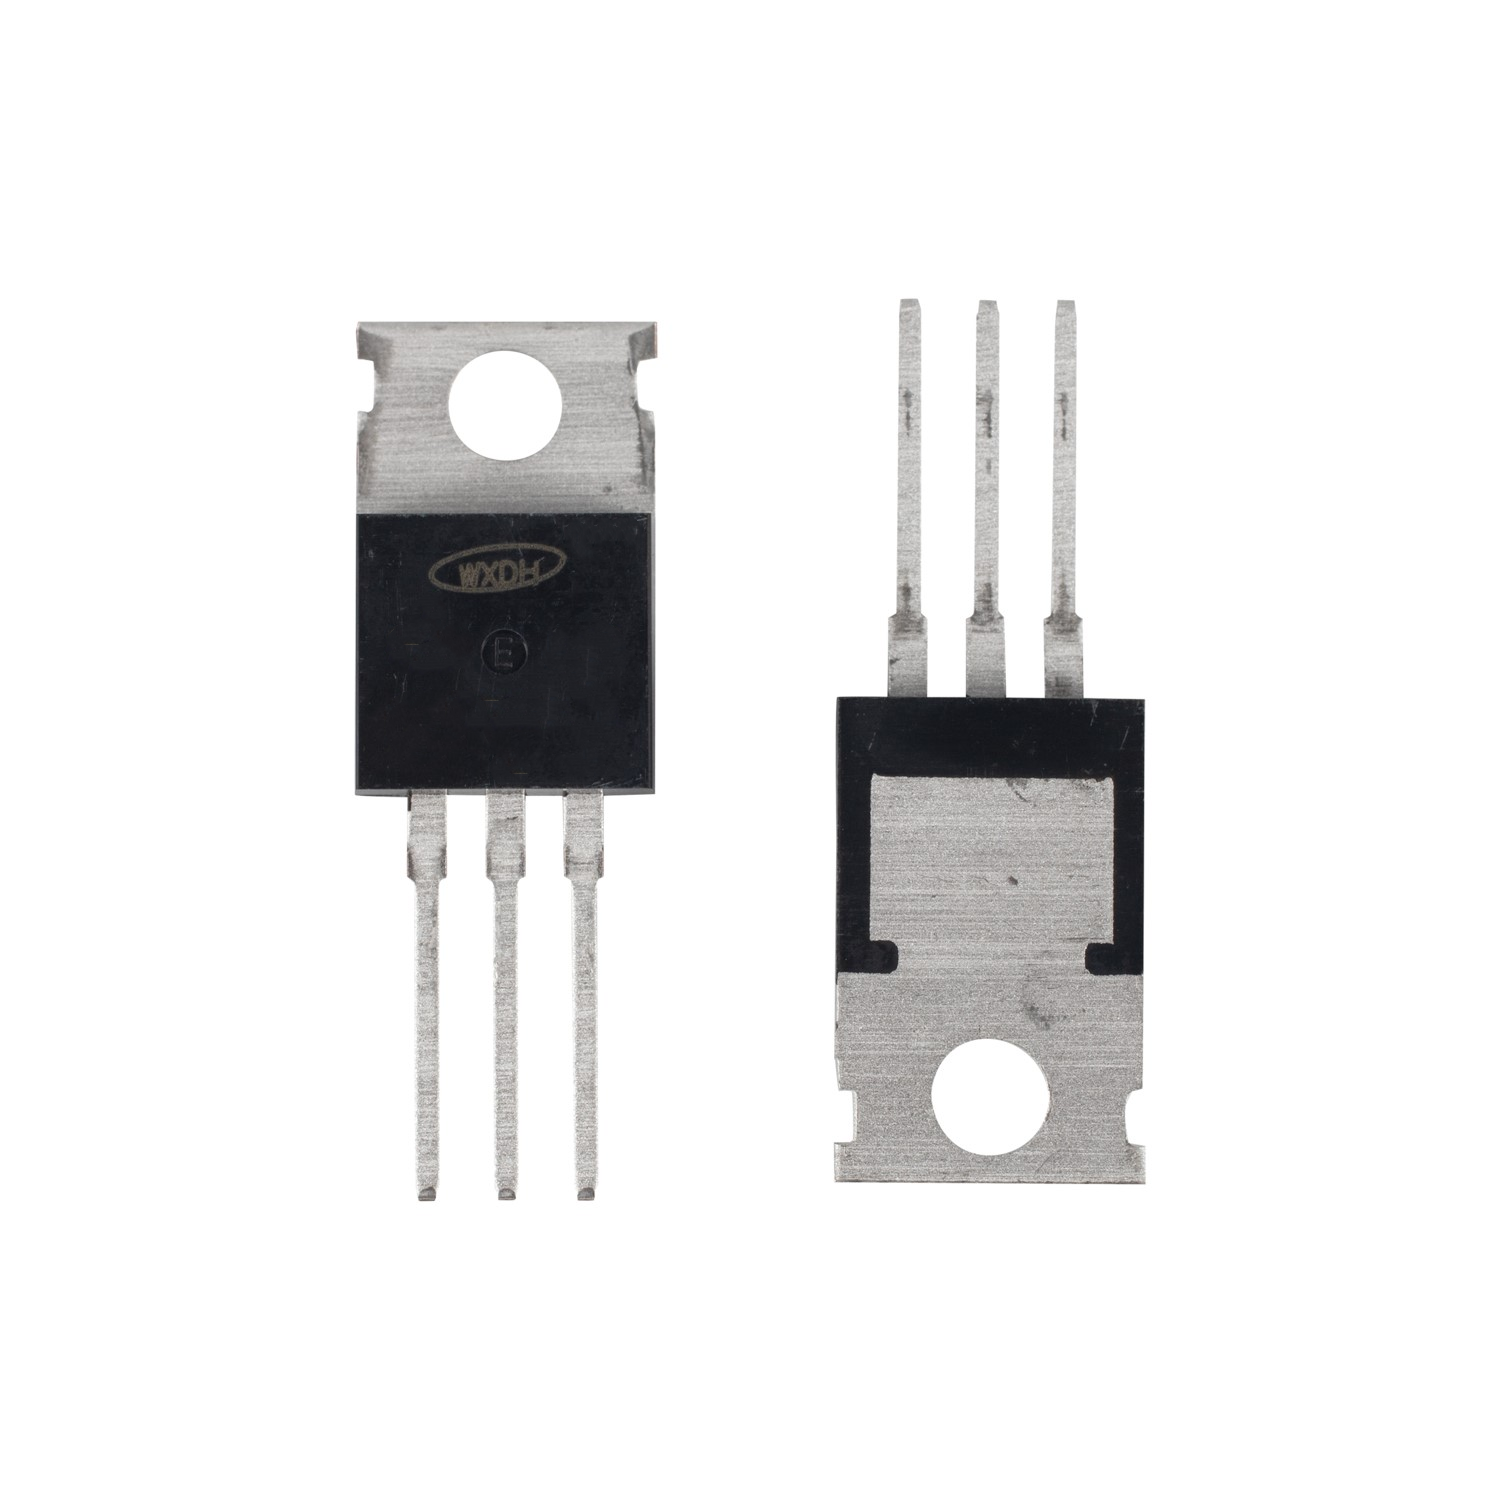 116A 68V N-channel Enhancement Mode Power MOSFET